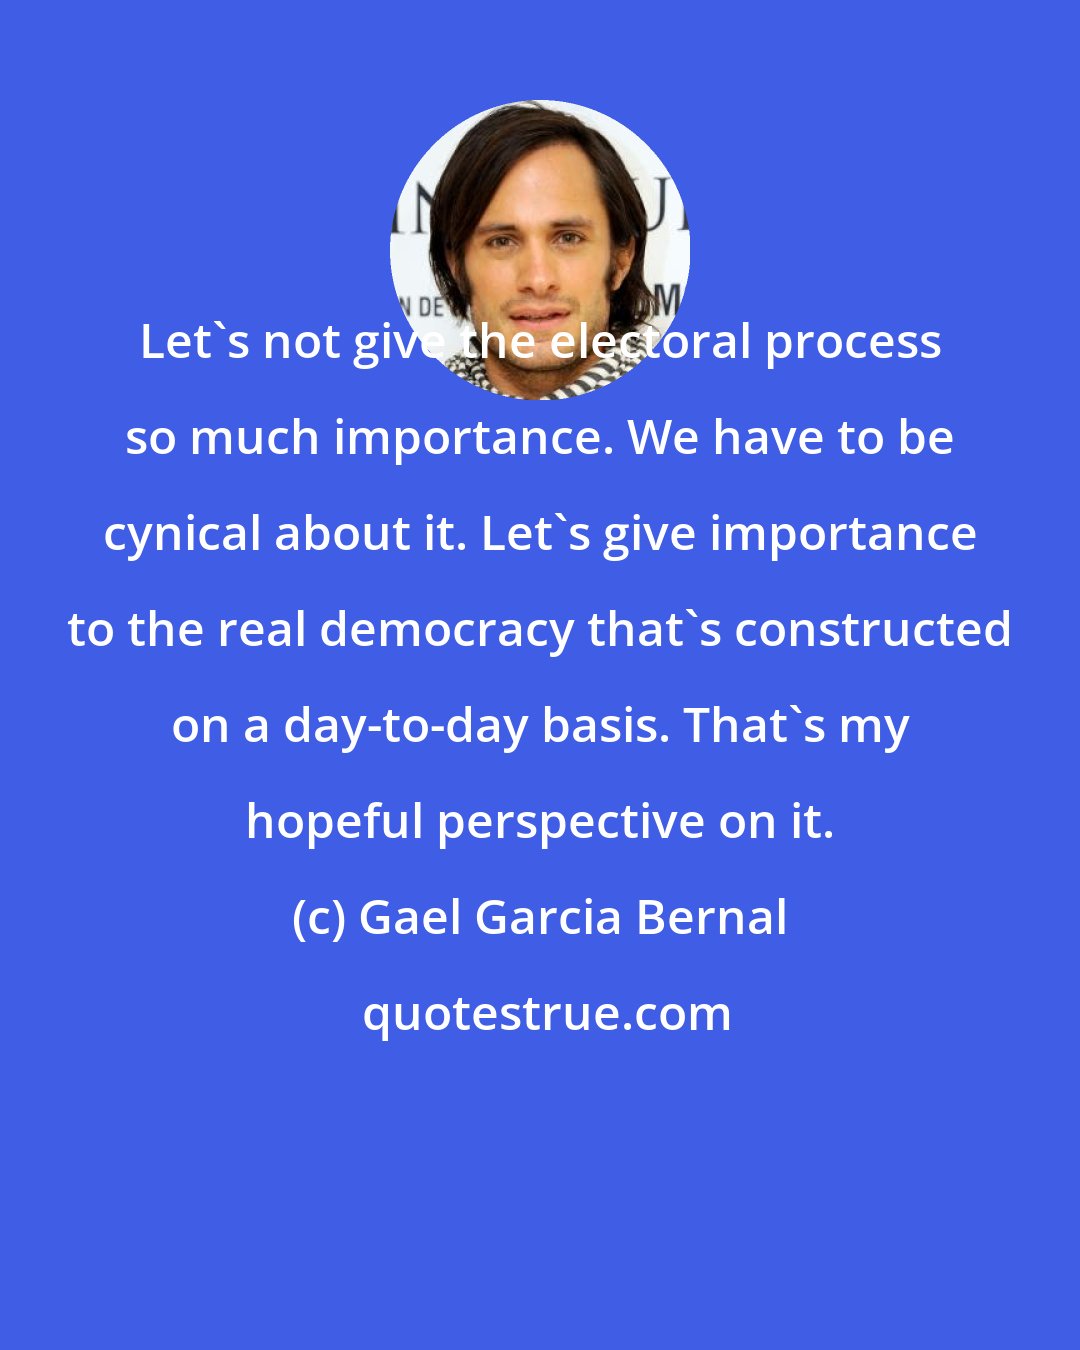 Gael Garcia Bernal: Let's not give the electoral process so much importance. We have to be cynical about it. Let's give importance to the real democracy that's constructed on a day-to-day basis. That's my hopeful perspective on it.